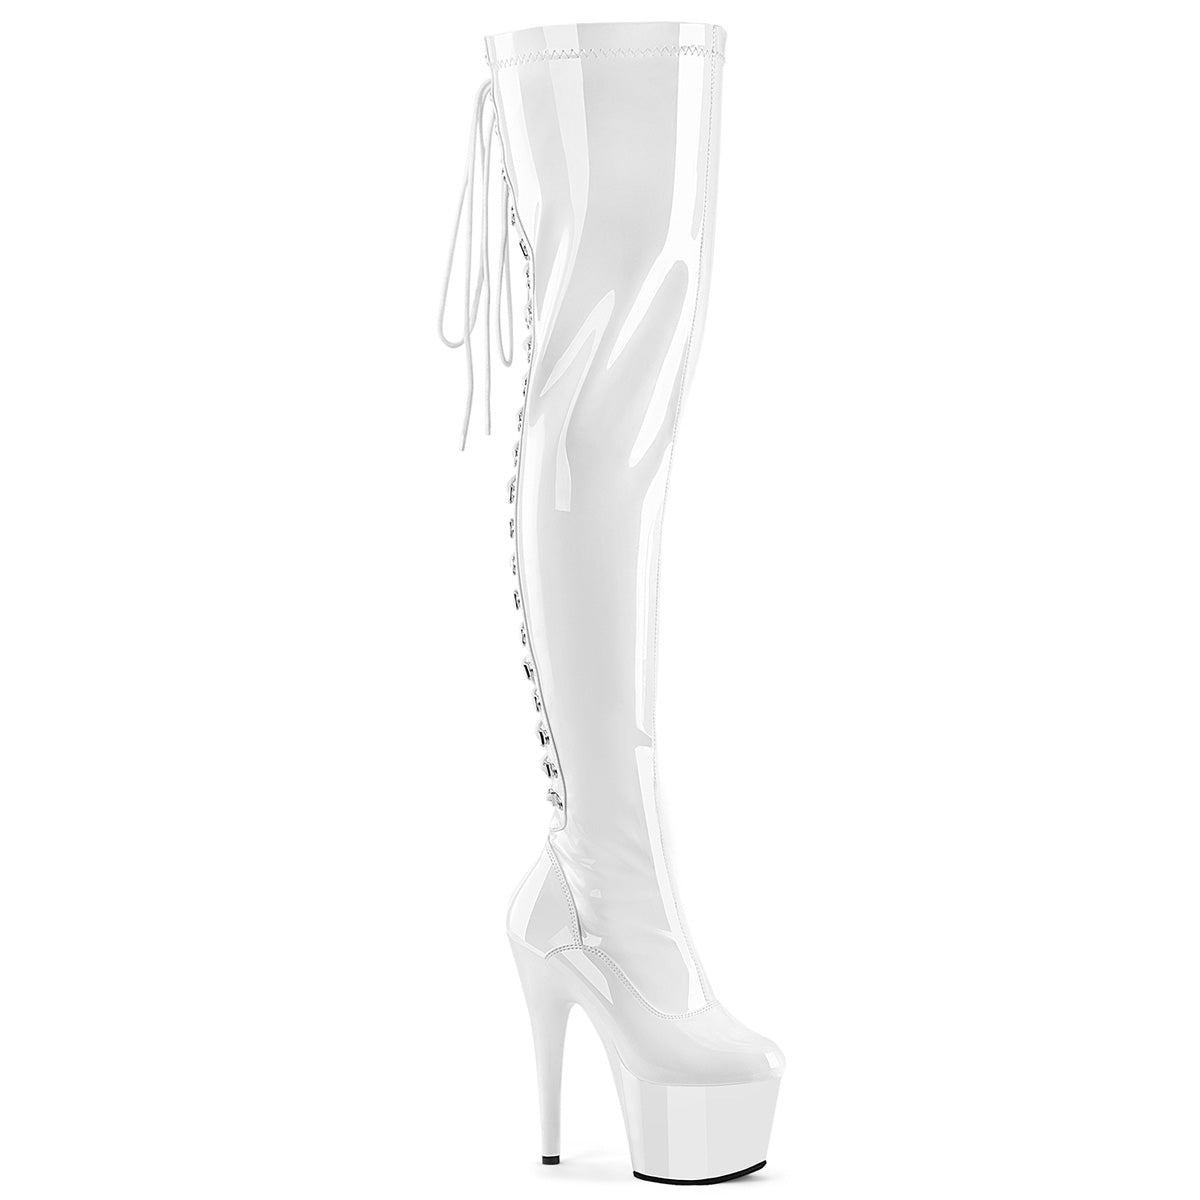 Lace up Thigh High Boots 7 inches